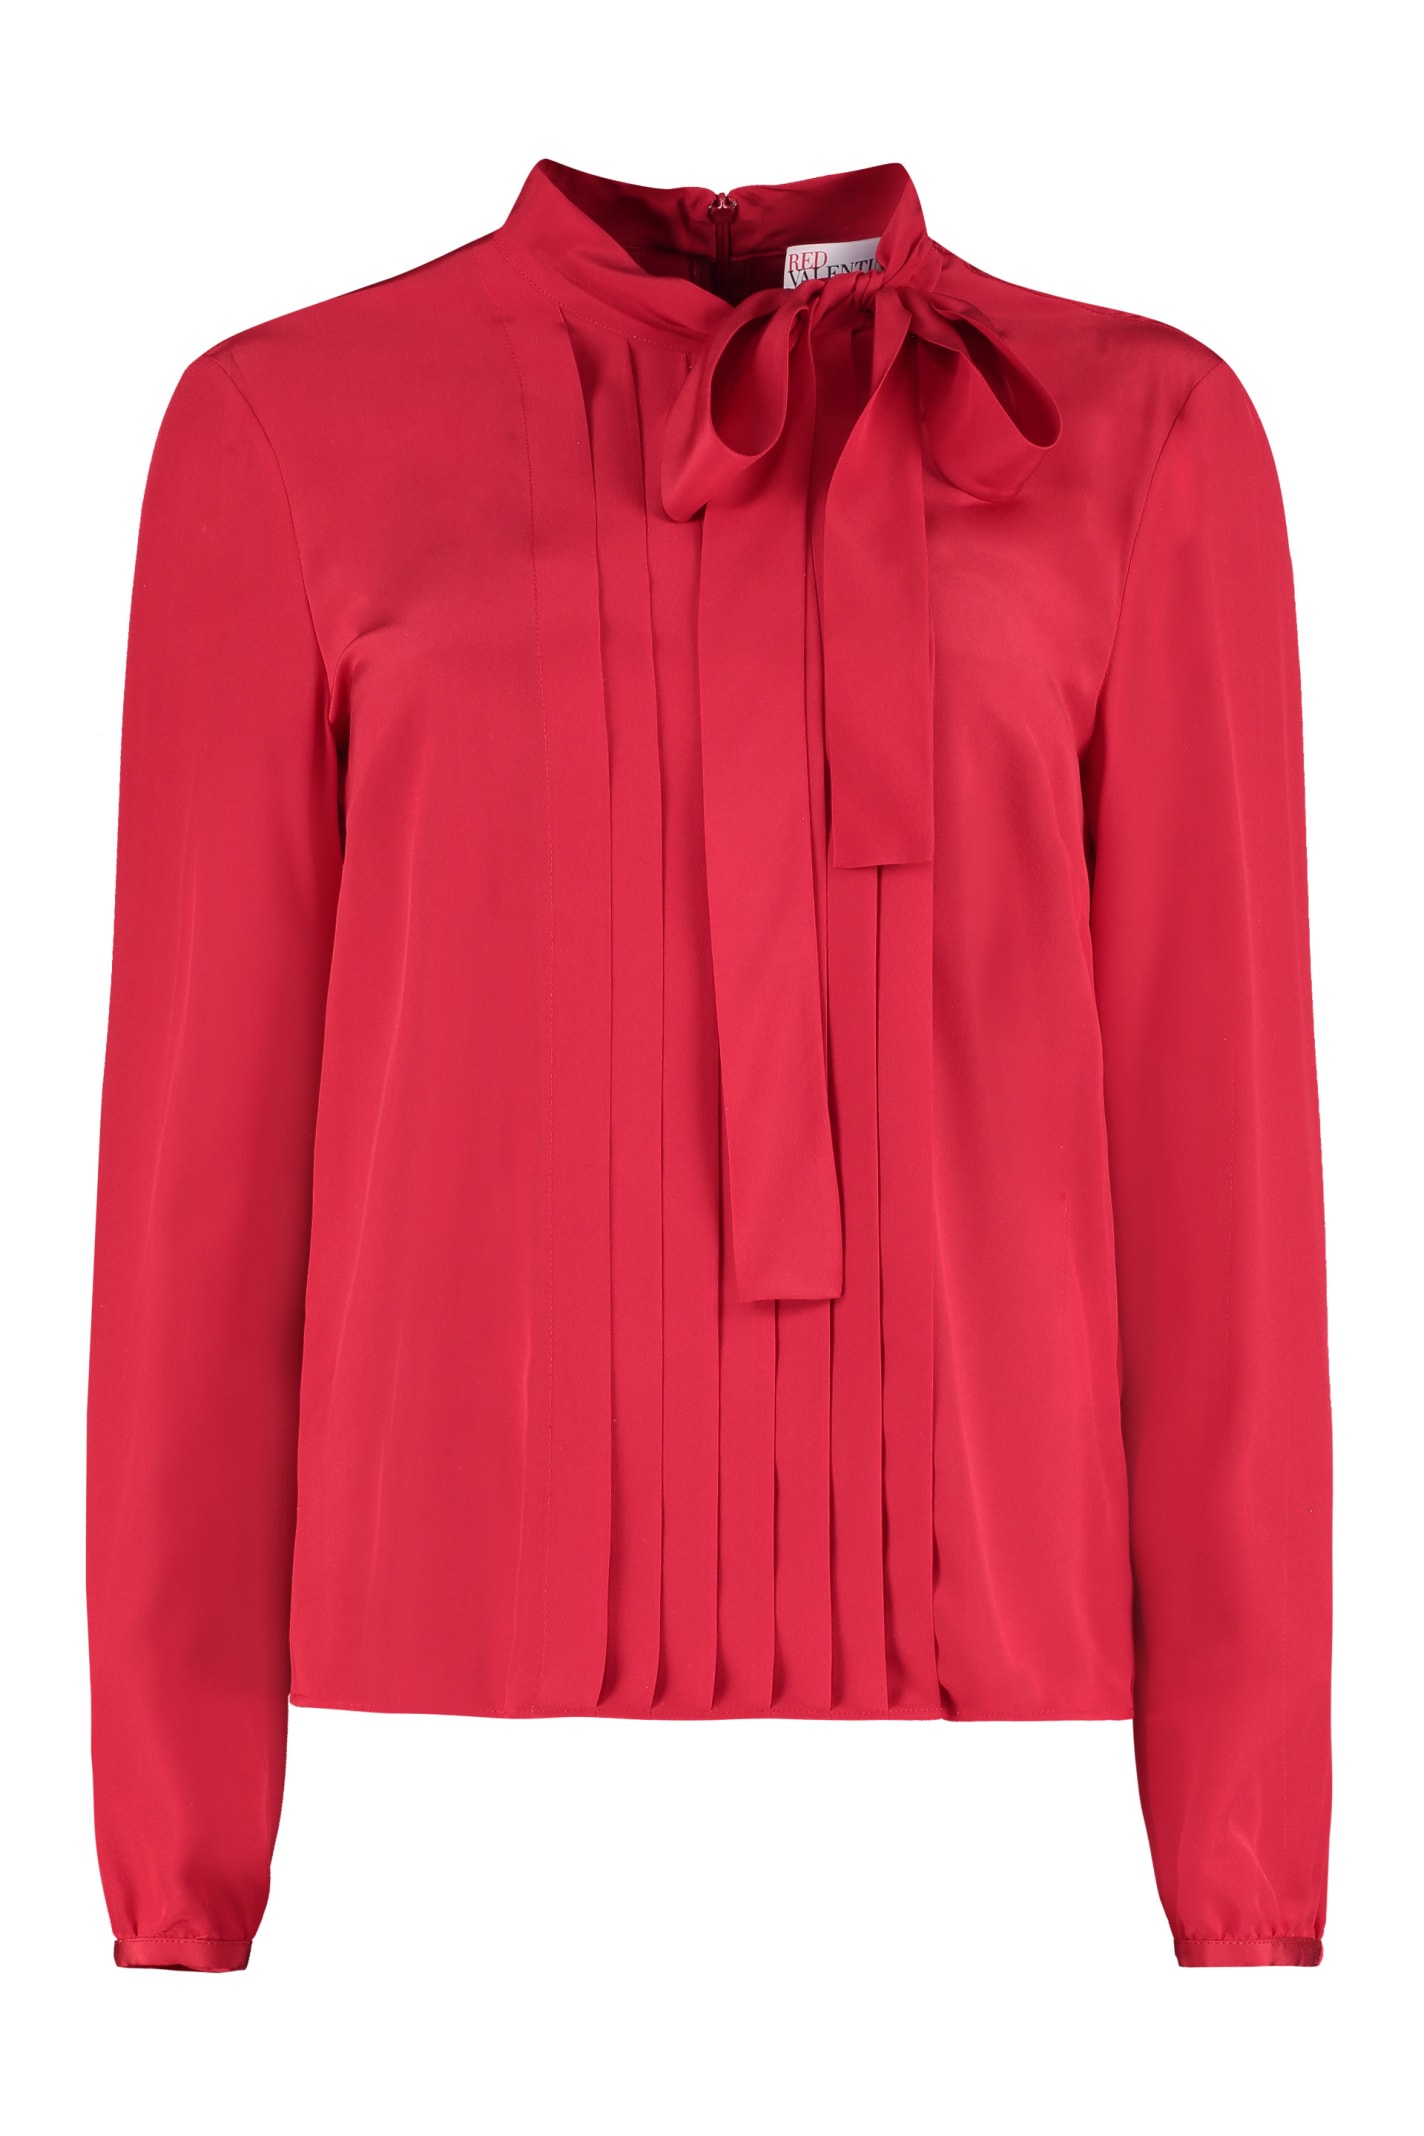 RED Valentino Pussy-bow Silk Blouse